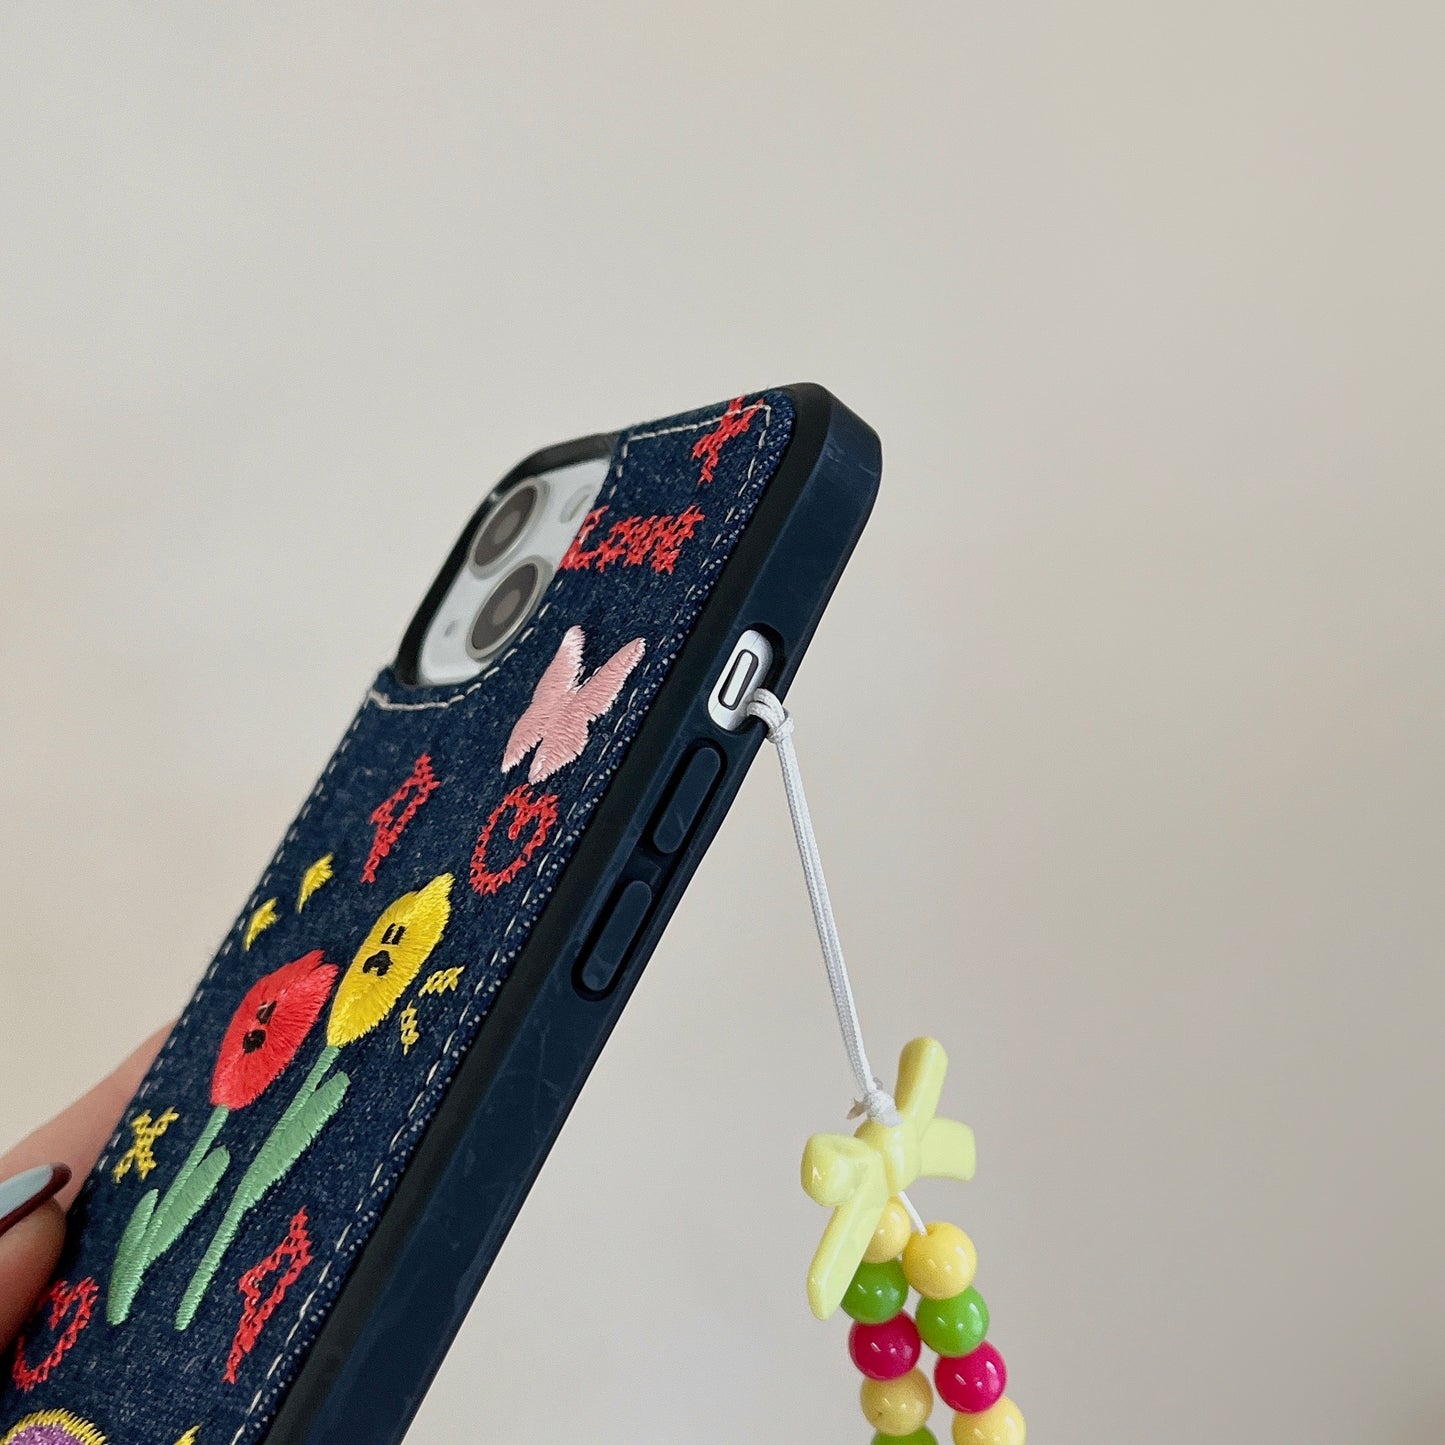 iPhone case,Cowboy Embroidery,Flowers,Butterfly.